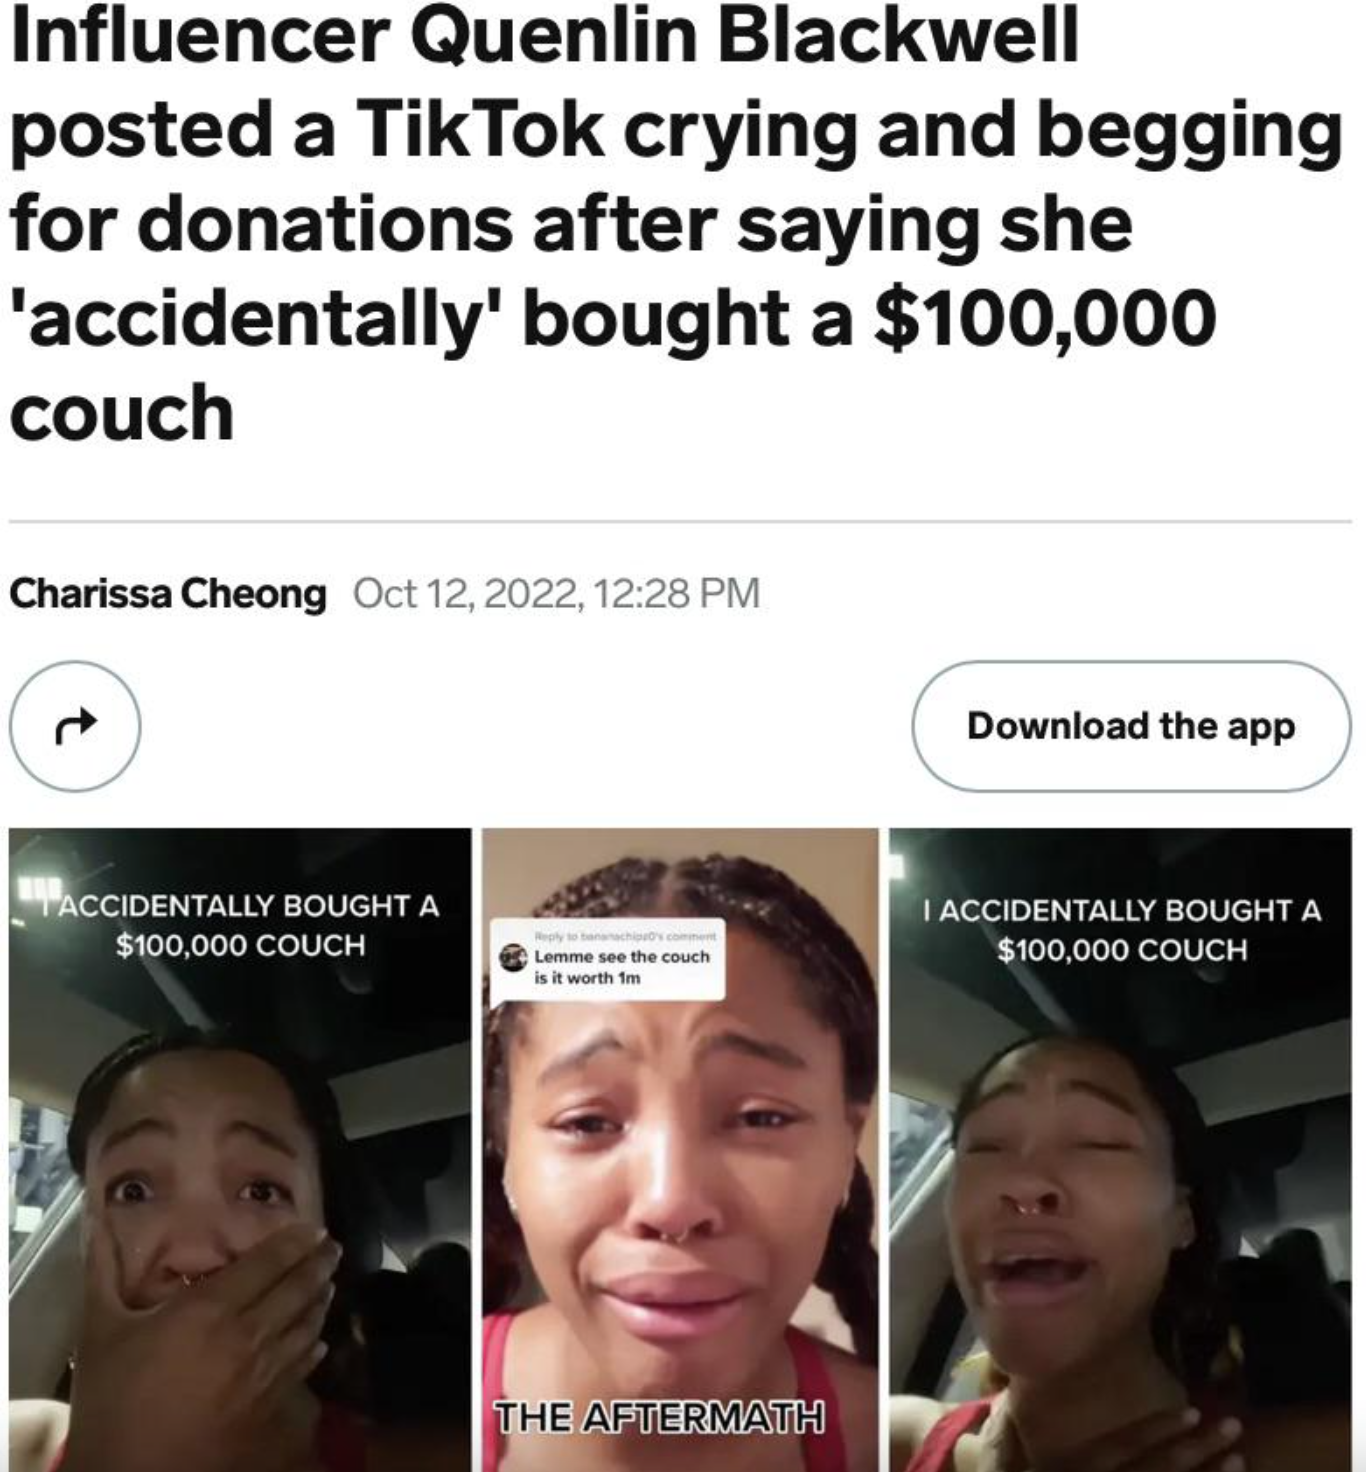 posted a TikTok crying and begging for donations after saying she 'accidentally' bought a $100,000 couch